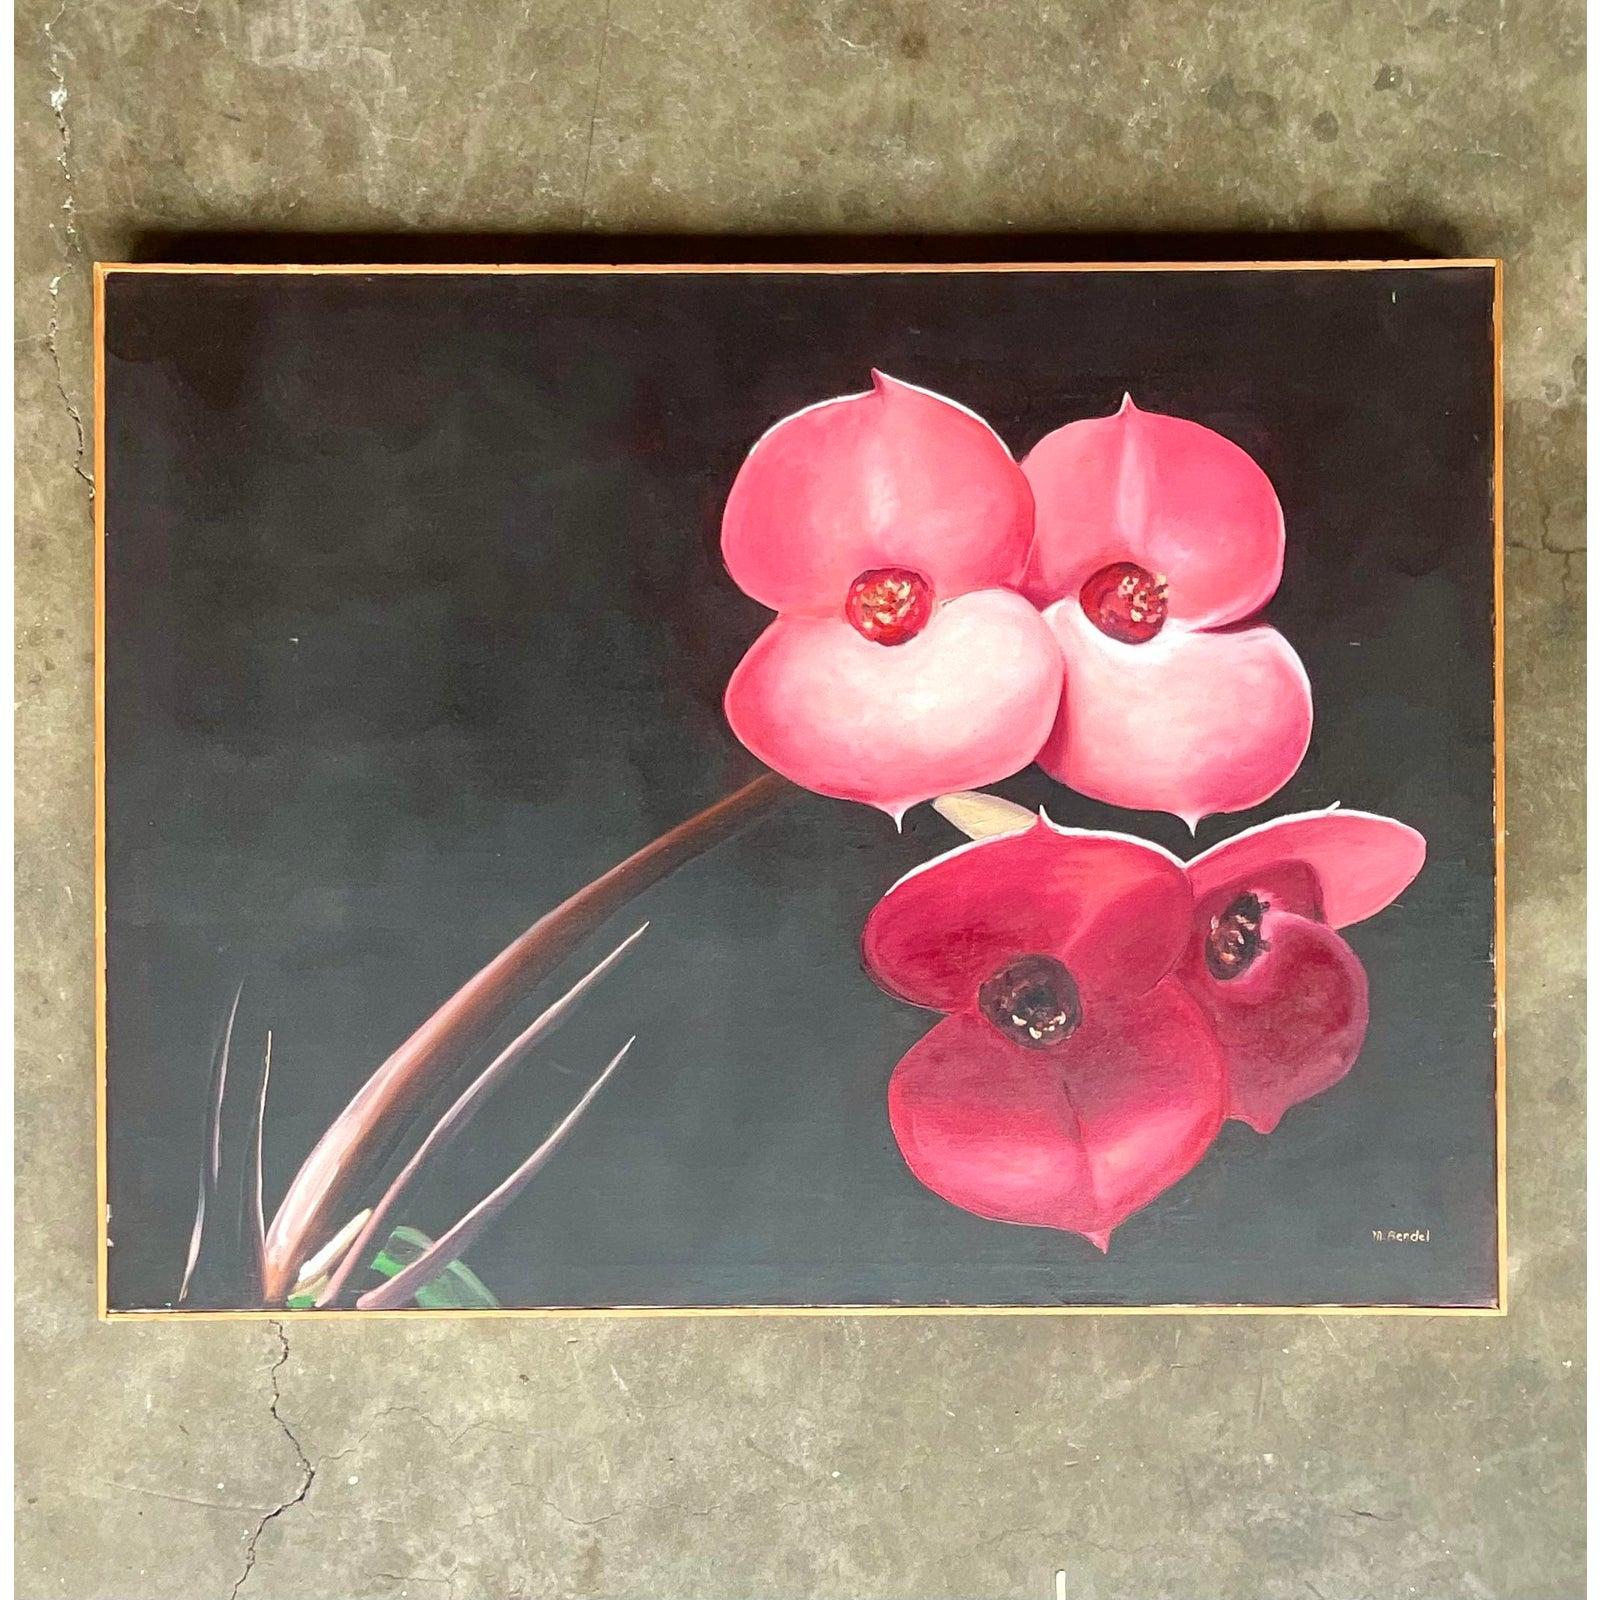 Stunning vintage original oil painting. A fabulous composition of orchids in bloom. Bright and rich colors dominate the canvas. Signed by the artist. Acquired from a Palm Beach estate.